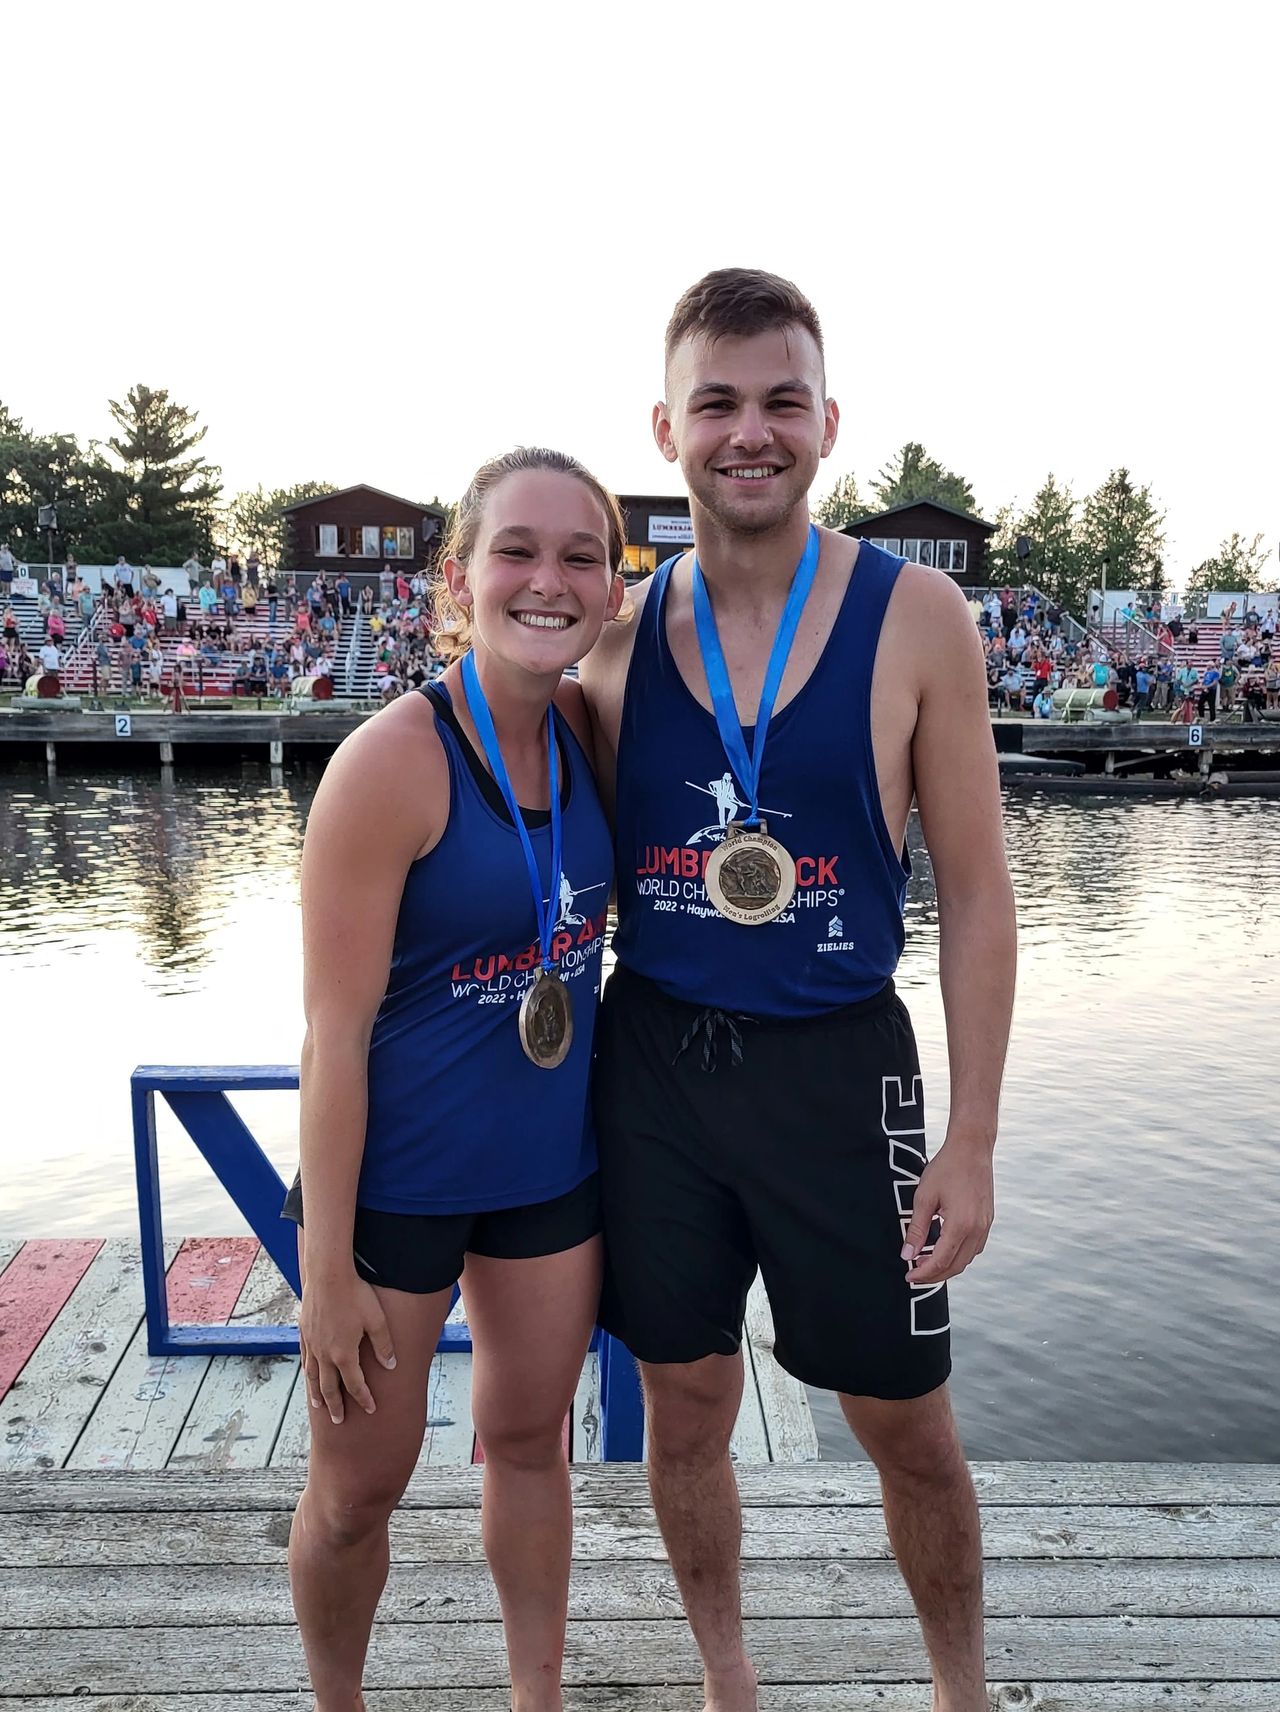 Livi Pappadopoulos and Anthony Polentini, 2022 Logrolling World Champions